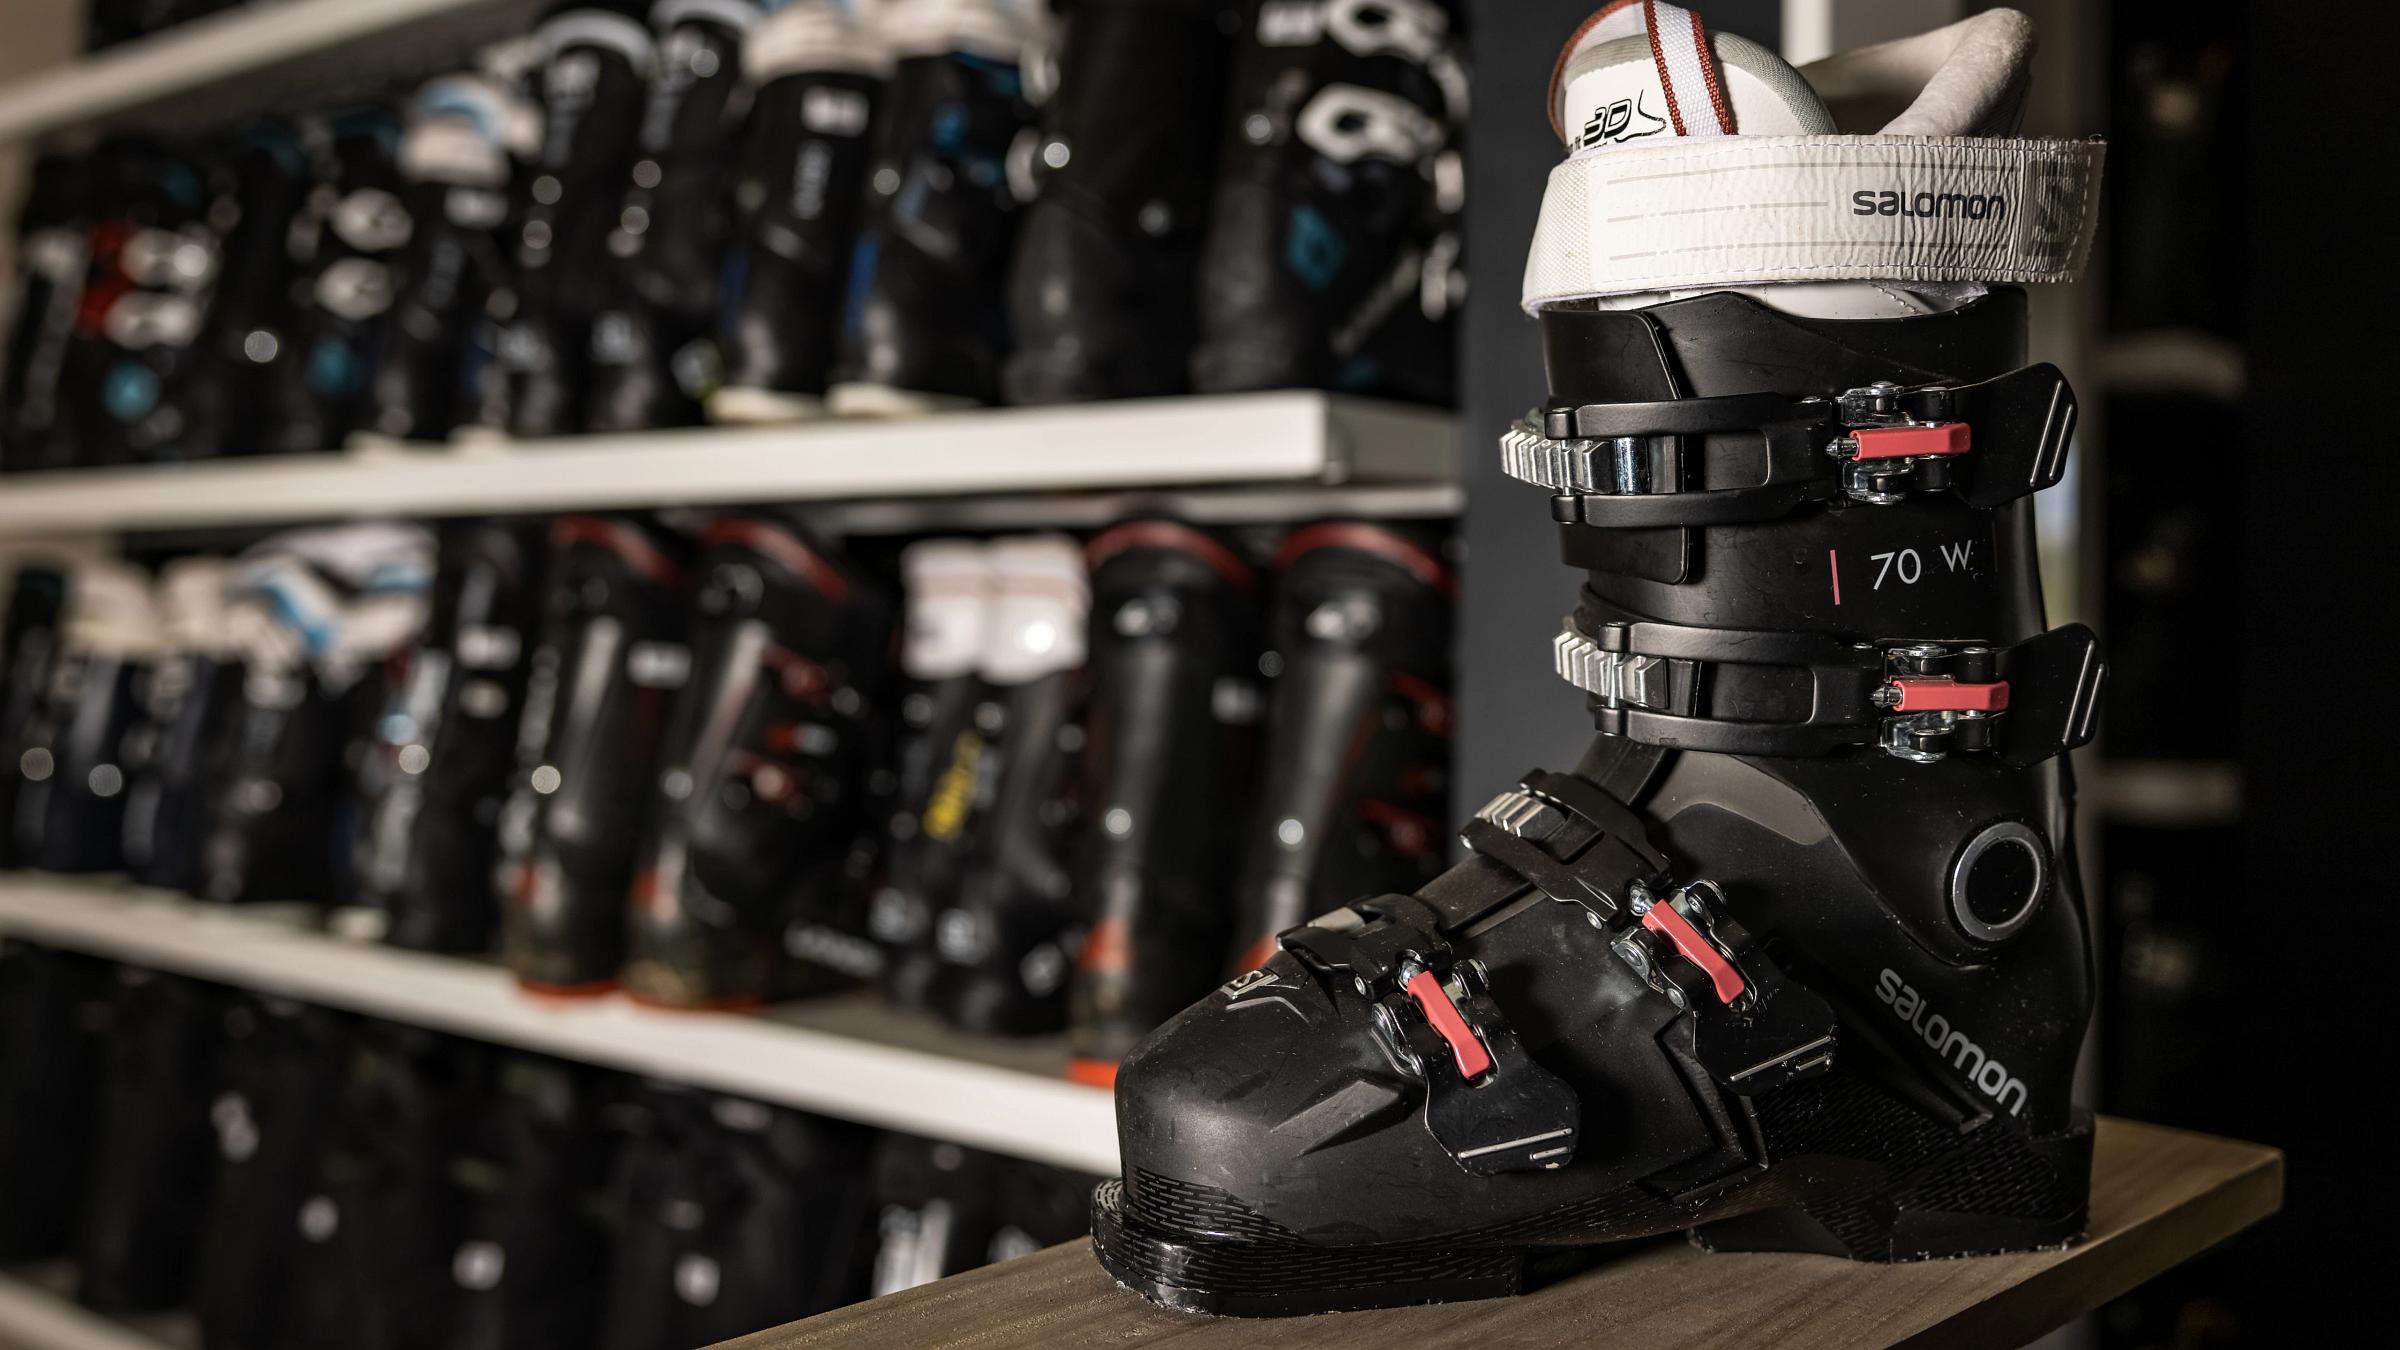 Ski boots on a counter.